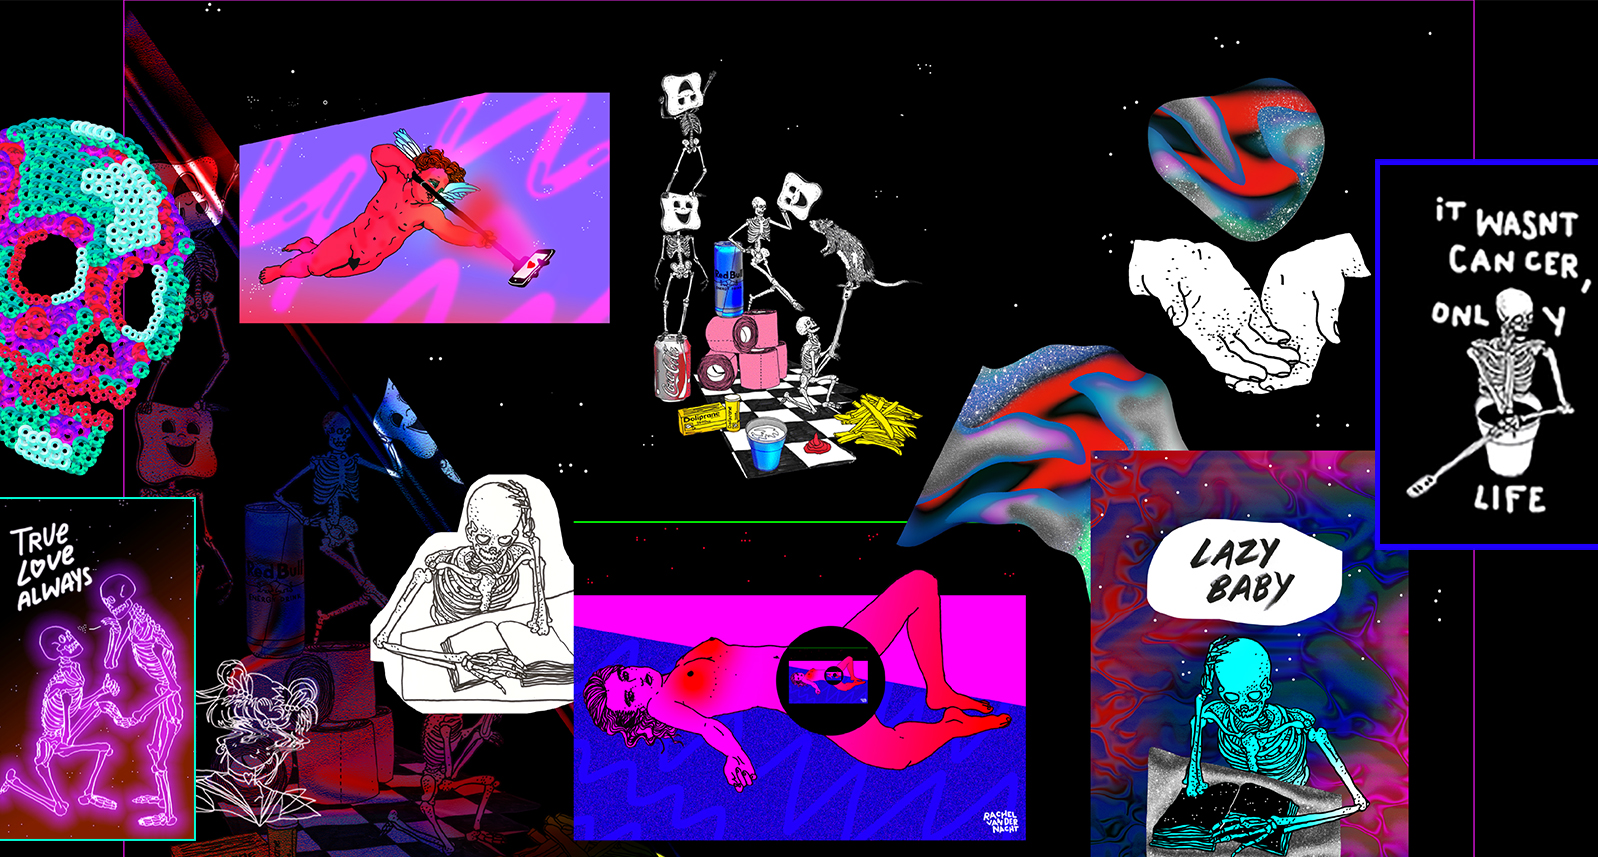 A set of some colorful neon drawings, some erotic that depicts: a skeleton head, two pople holding hands, askeleton reading a book, some hands one on top of another, a naked girl standing on the floor and a cupid figure with a bow and arrow.